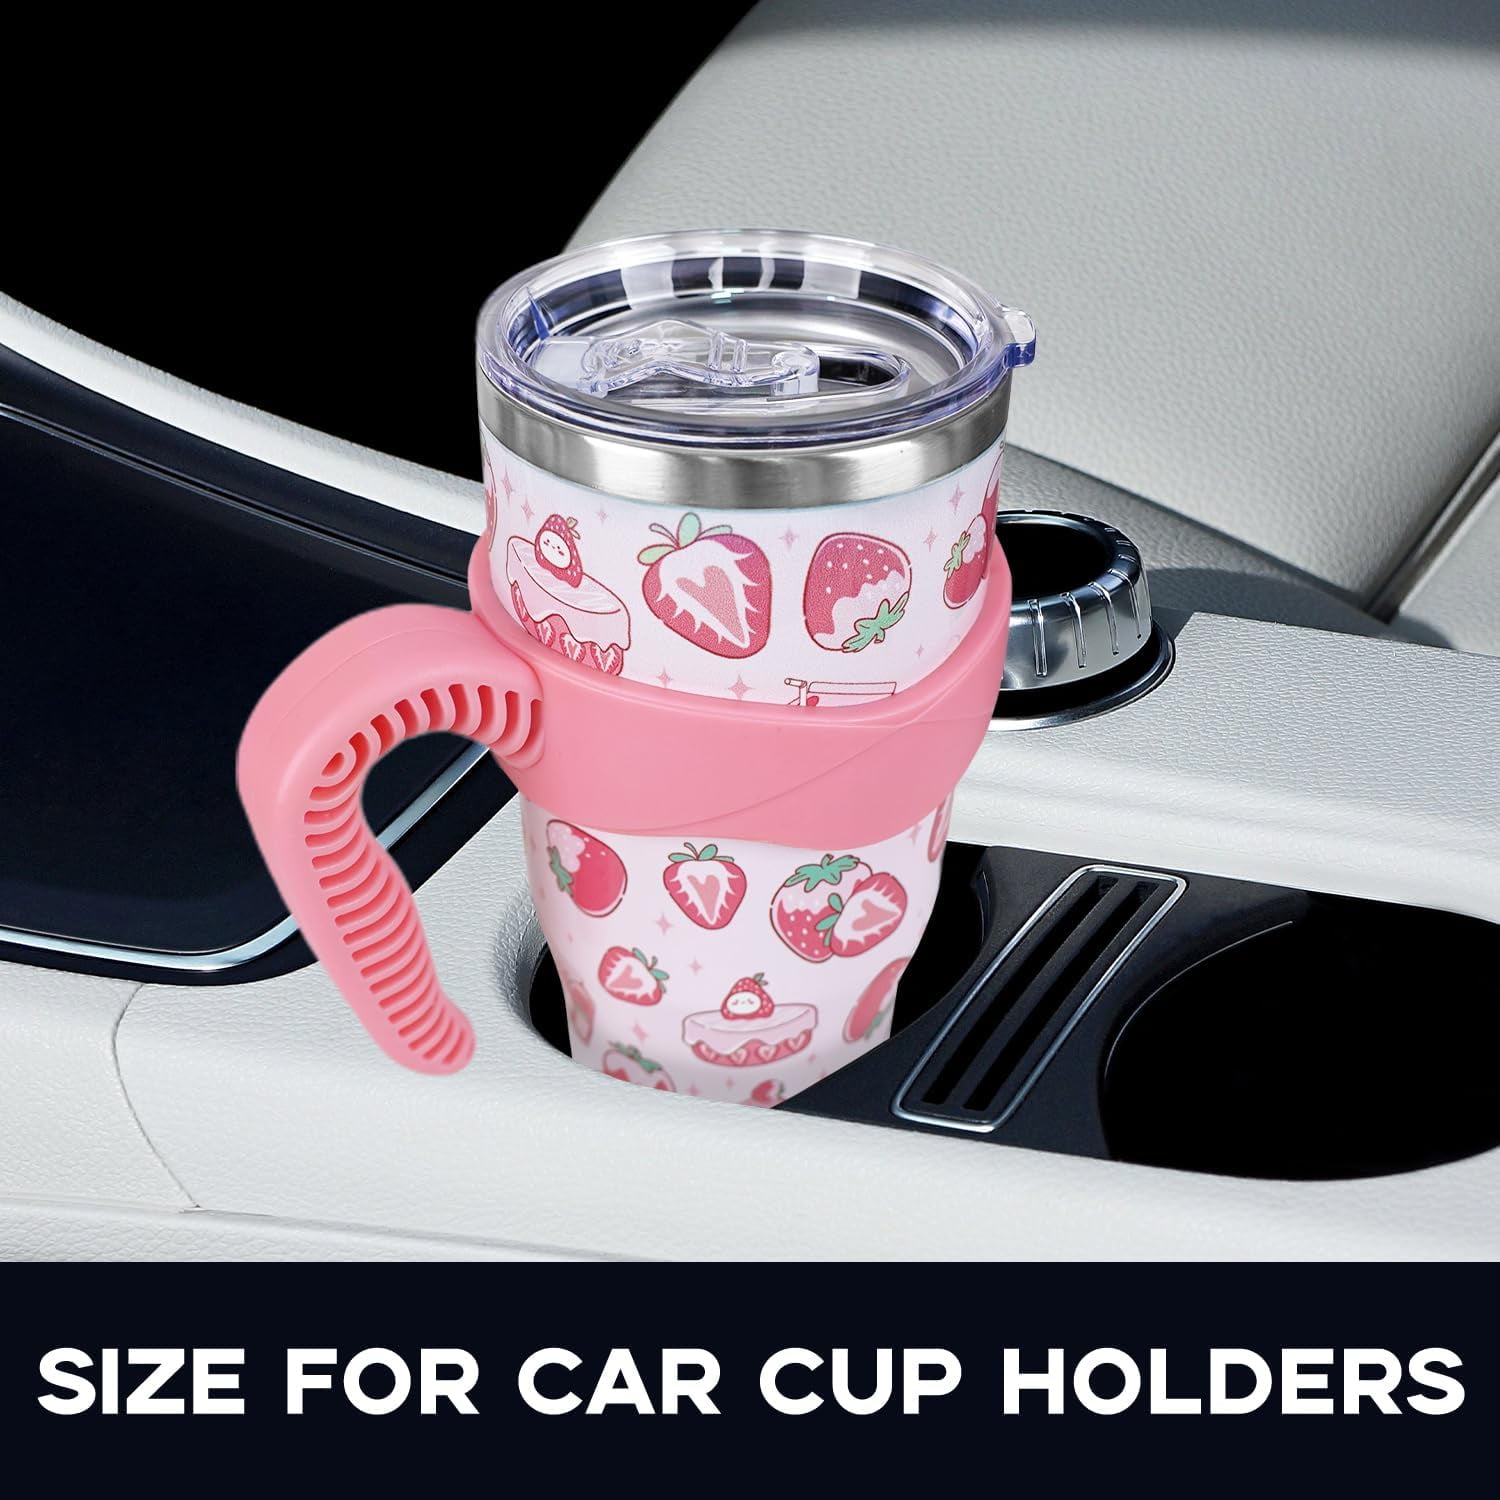 Handle Insulated Cup- Light Pink (40oz) – The Silver Strawberry